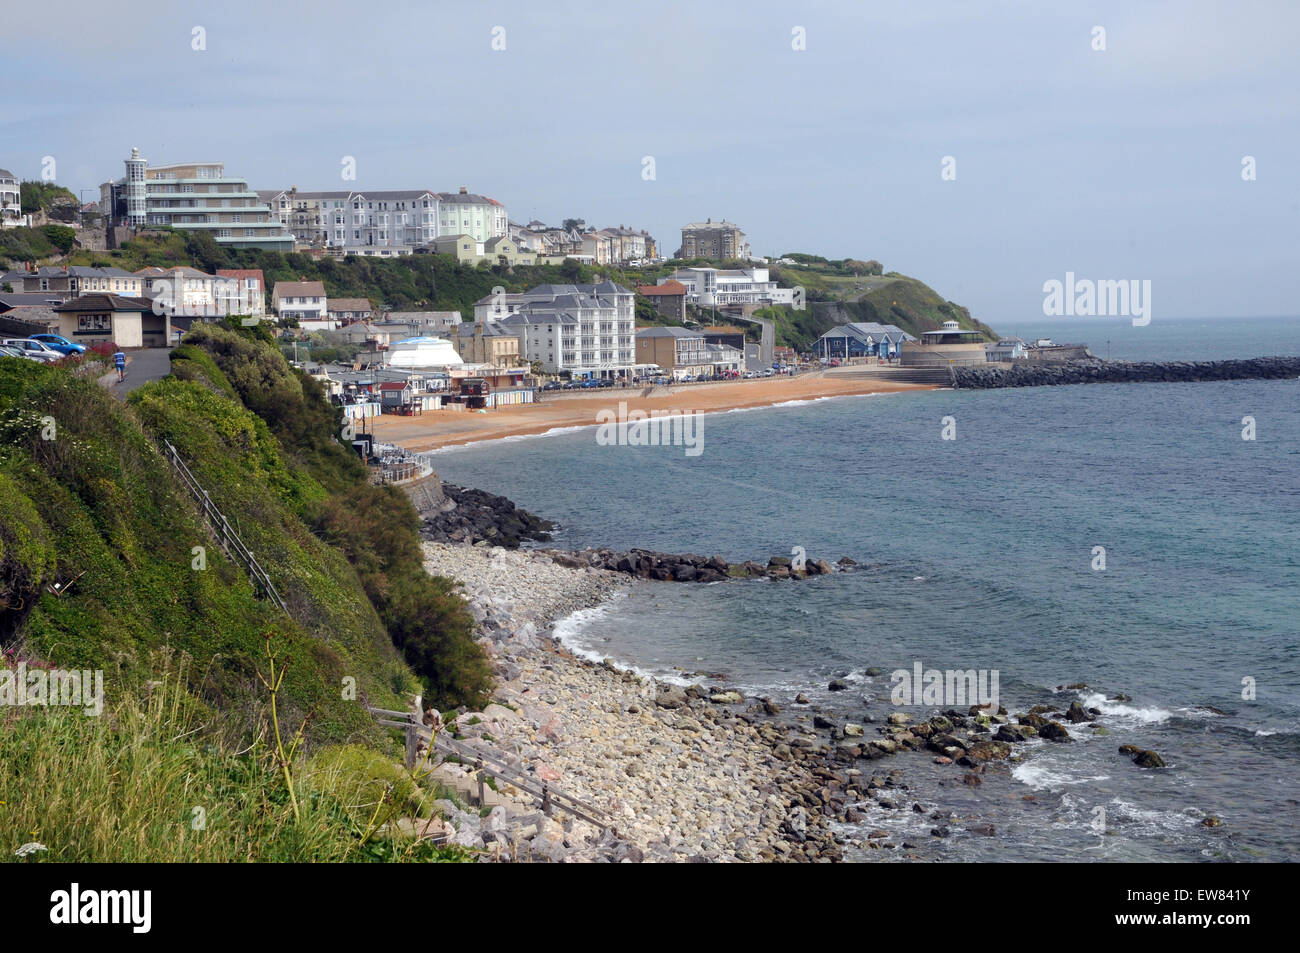 The seafront and beach at Ventnor on the Isle of Wight. Pic MIke Walker, Mike Walker Pictures Stock Photo